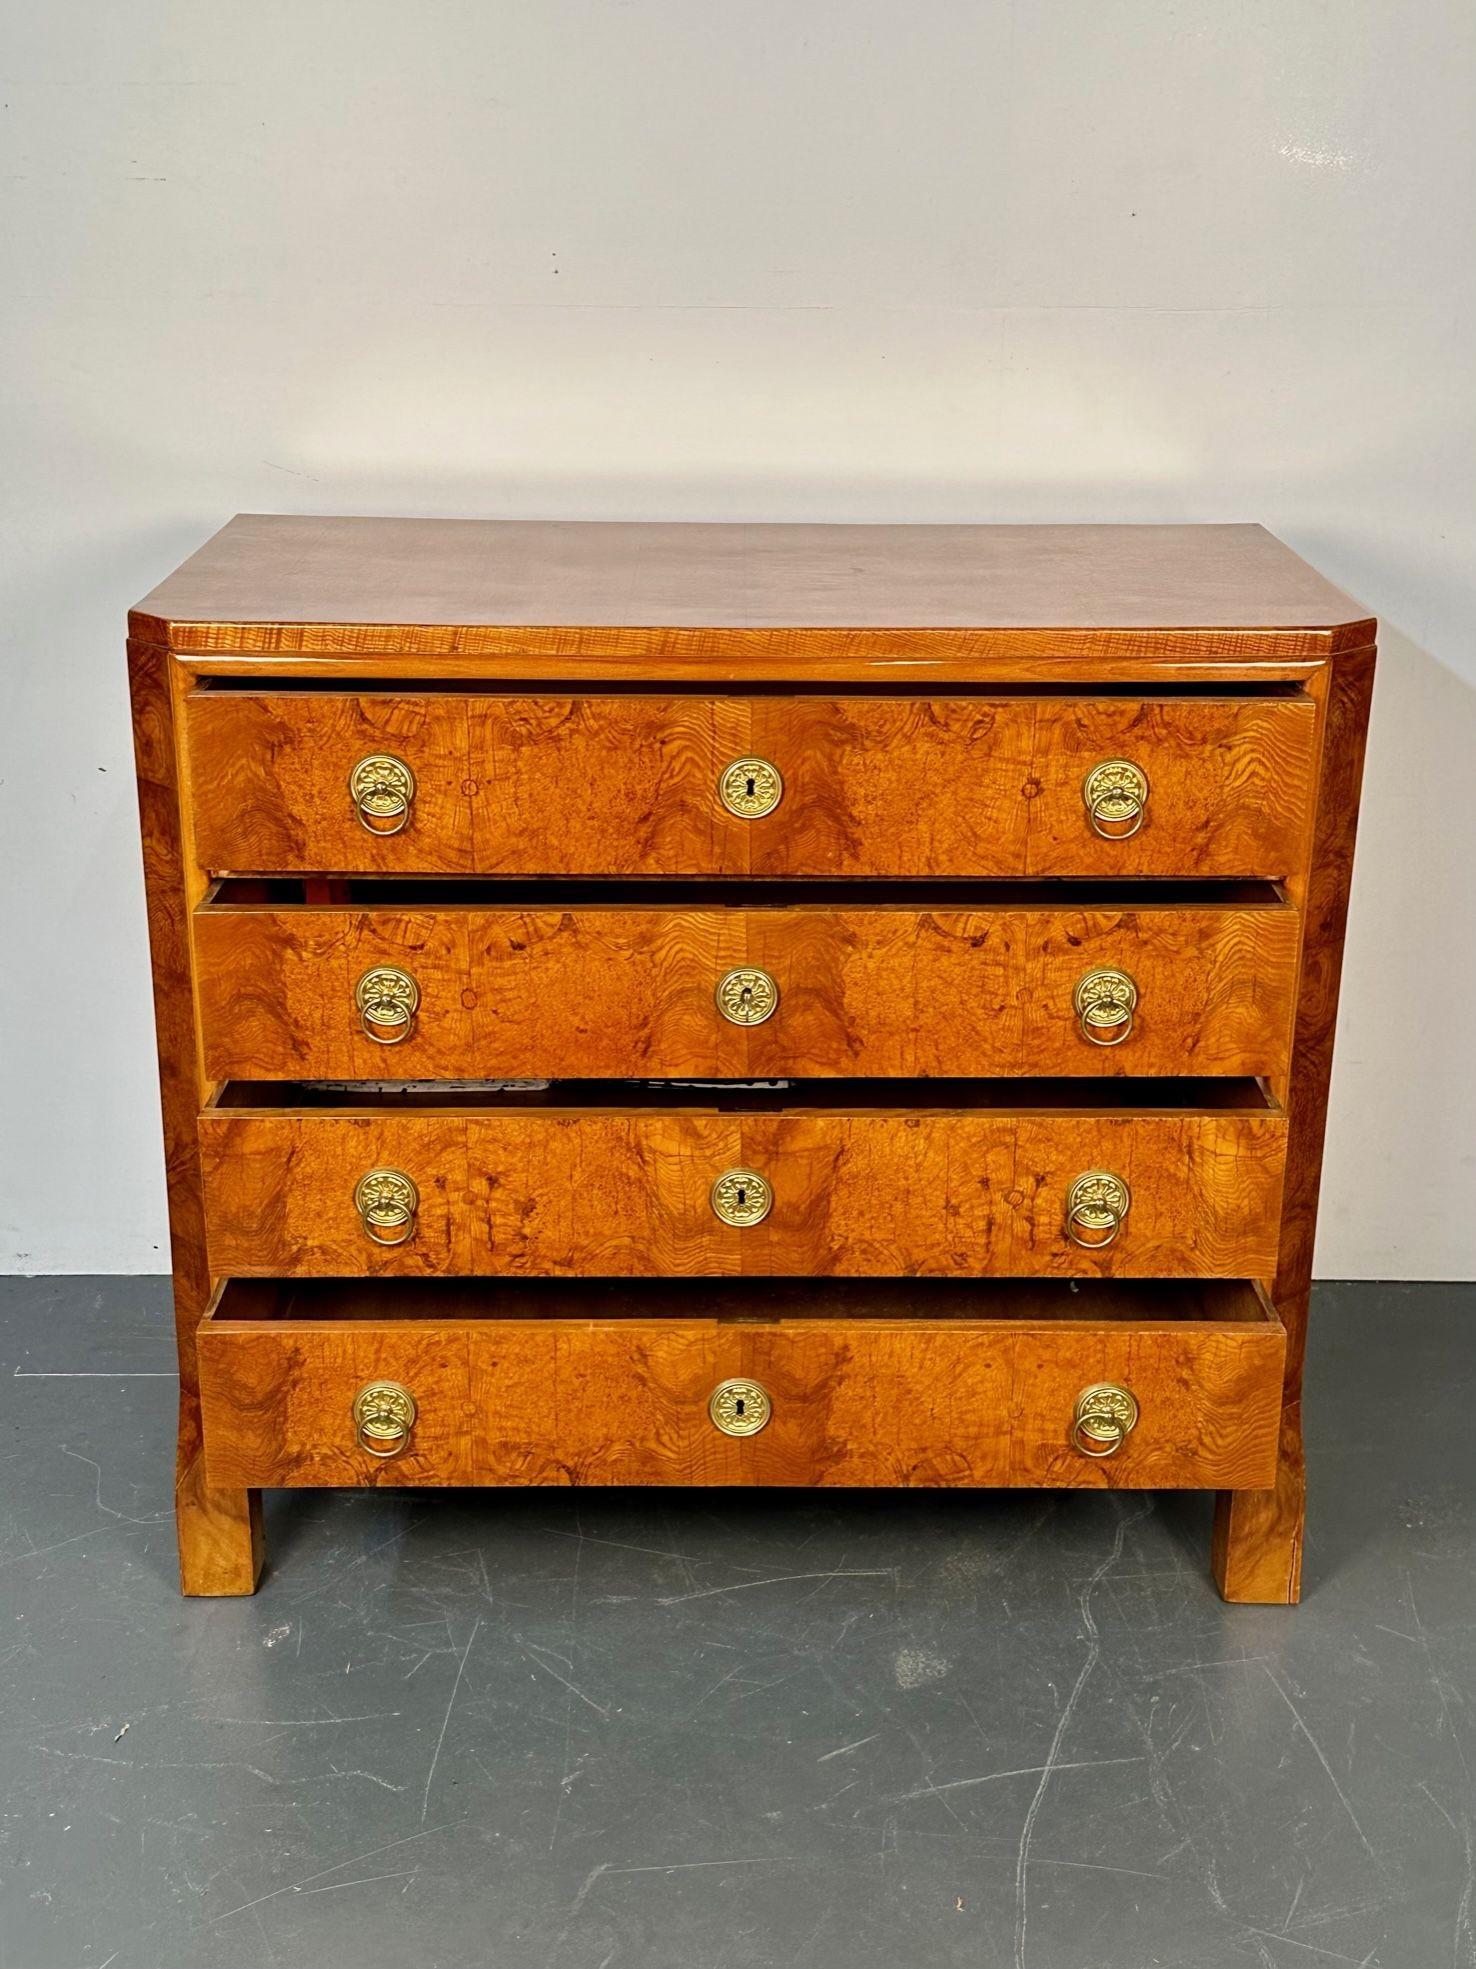 Refinished Biedermeier Four Drawer Satin Birch Chest, Dresser or Commode, 1850s For Sale 2